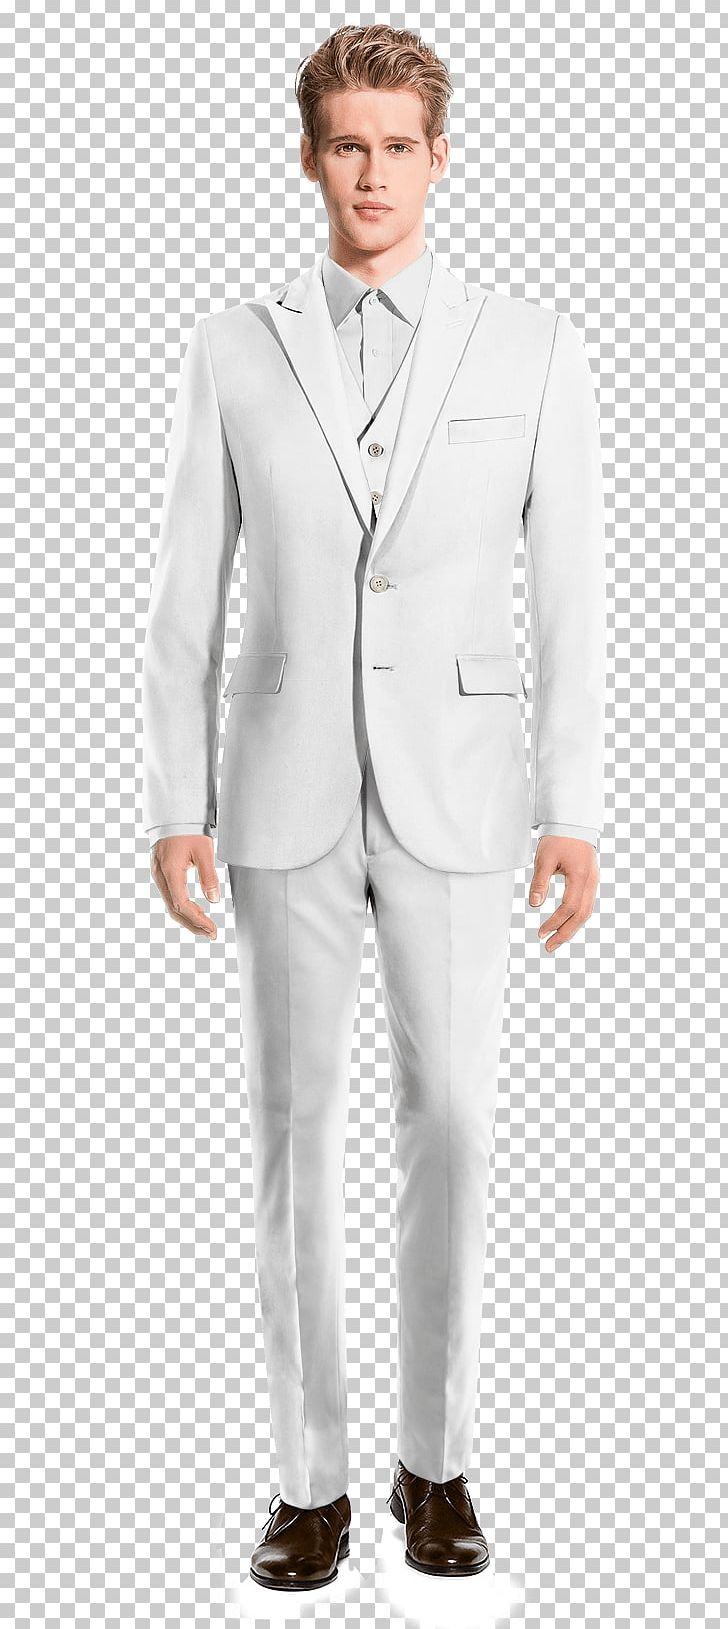 Suit Blazer Pants Tuxedo Double-breasted PNG, Clipart, Blazer, Chino Cloth, Clothing, Coat, Costume Free PNG Download